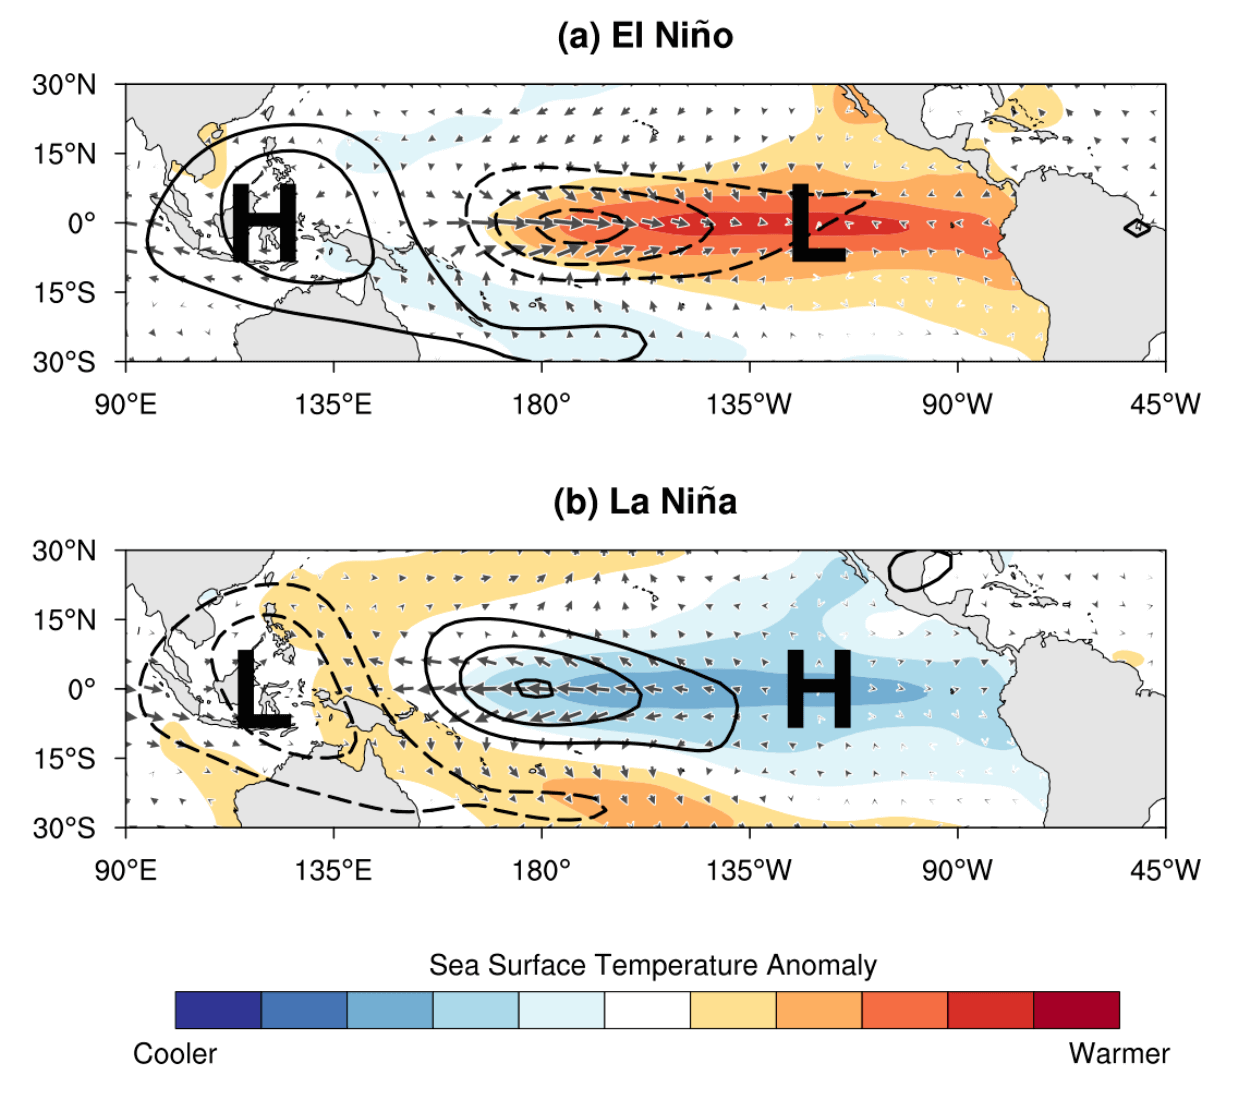 enso-el-nino-update-forecast-weather-temperature-pressure-anomaly-cold-atmospheric-pattern-forecast-snowfall-event